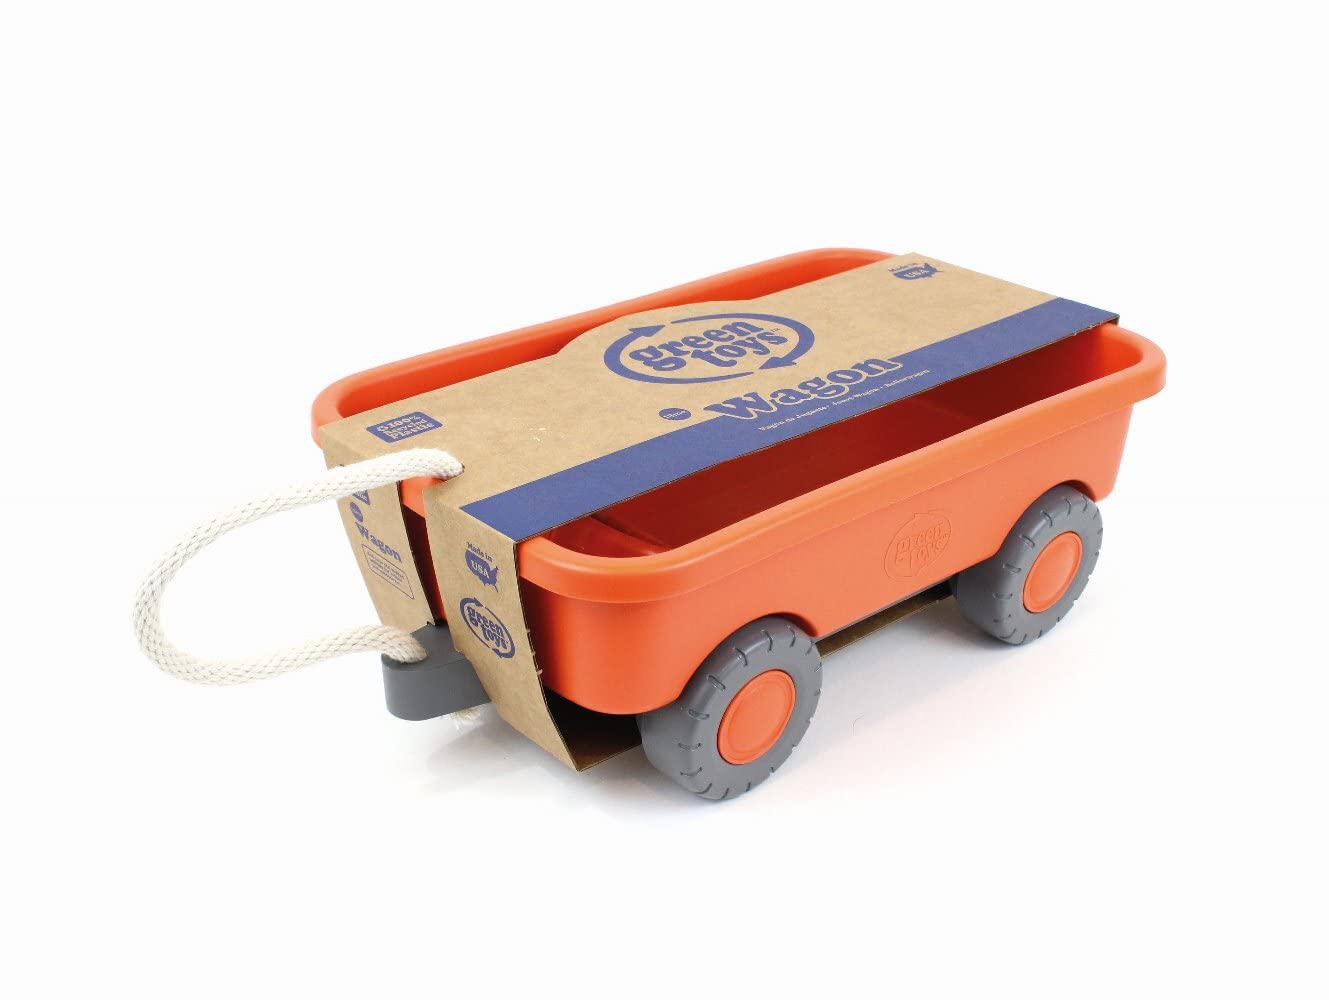 Green Toys Wagon, Orange - Pretend Play, Motor Skills, Kids Outdoor Toy Vehicle. No BPA, phthalates, PVC. Dishwasher Safe, Recycled Plastic, Made in USA. $13.19